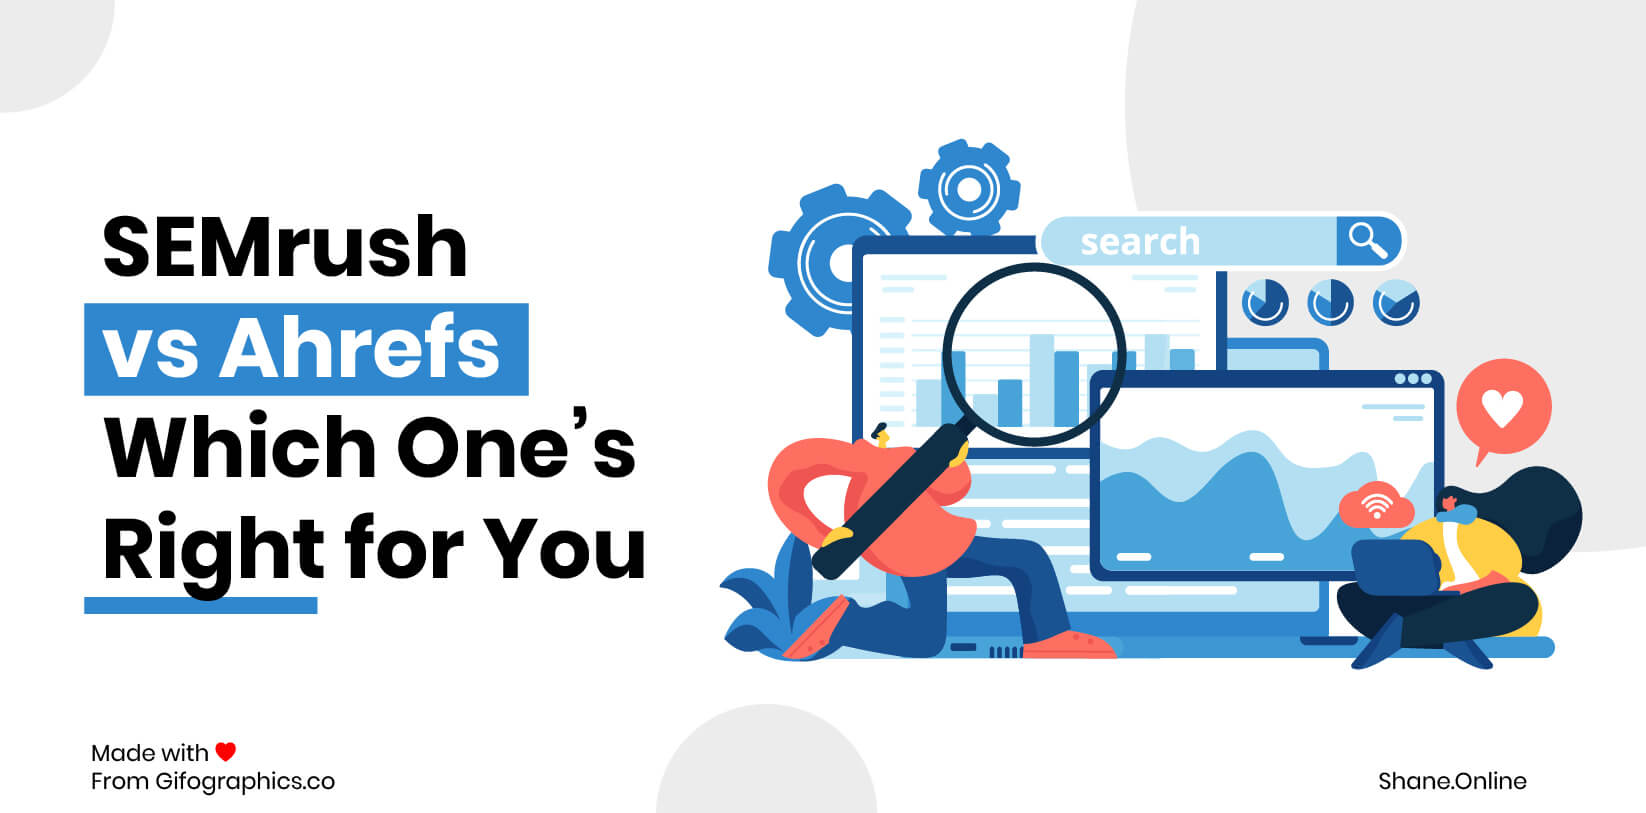 Semrush vs Ahrefs – Which One’s Right for You?